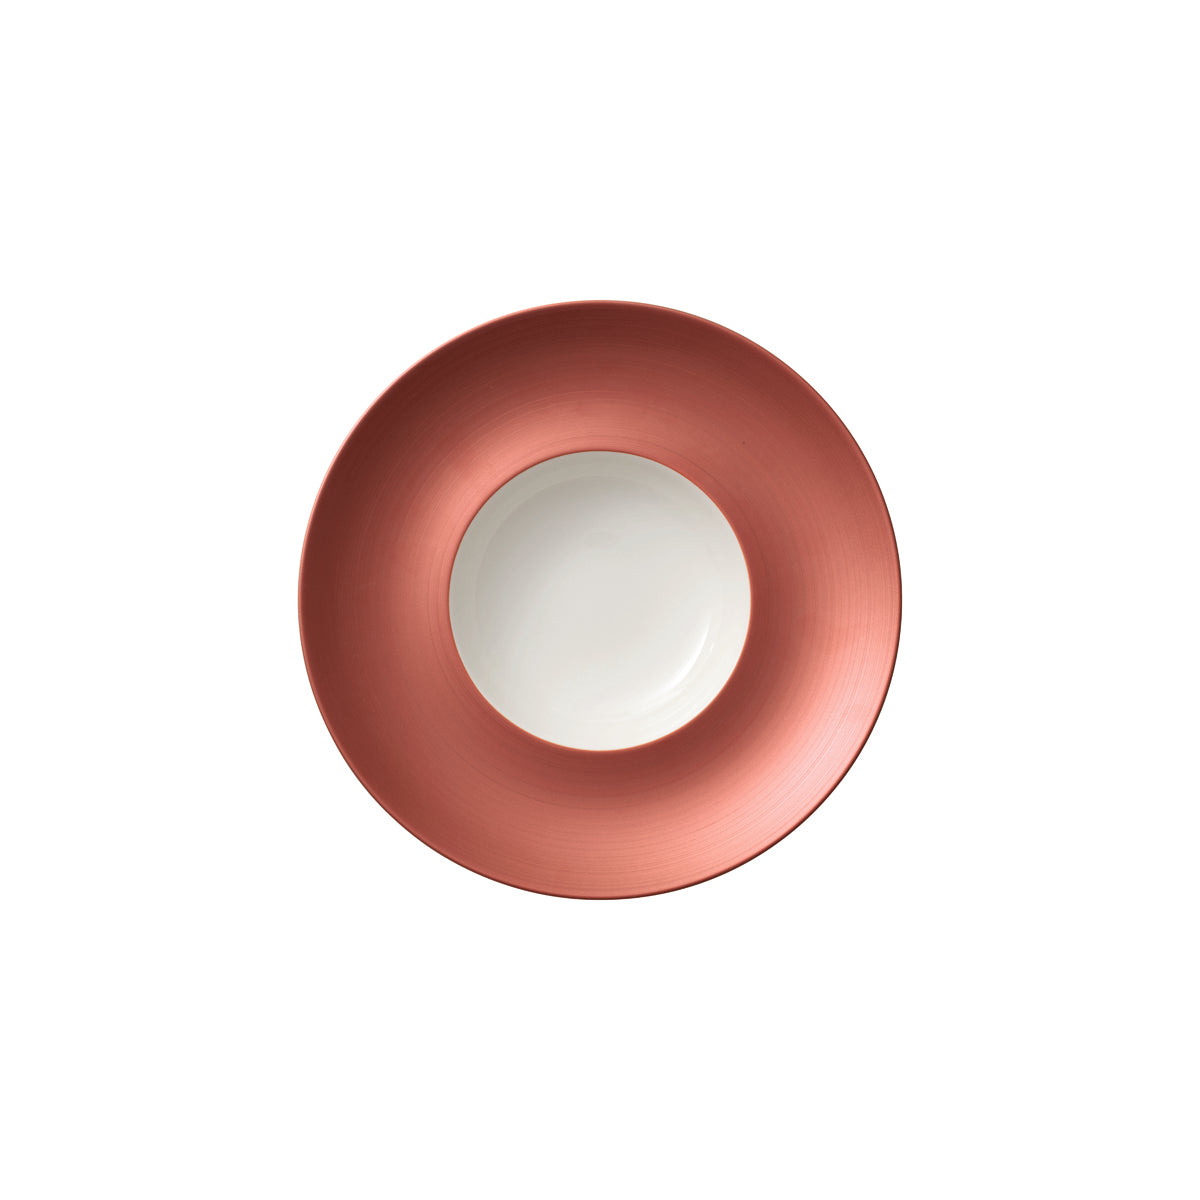 VB16-4070-2704 Villeroy And Boch Villeroy And Boch Copper Glow Deep Plate Outside 290mm / 140mm Tomkin Australia Hospitality Supplies